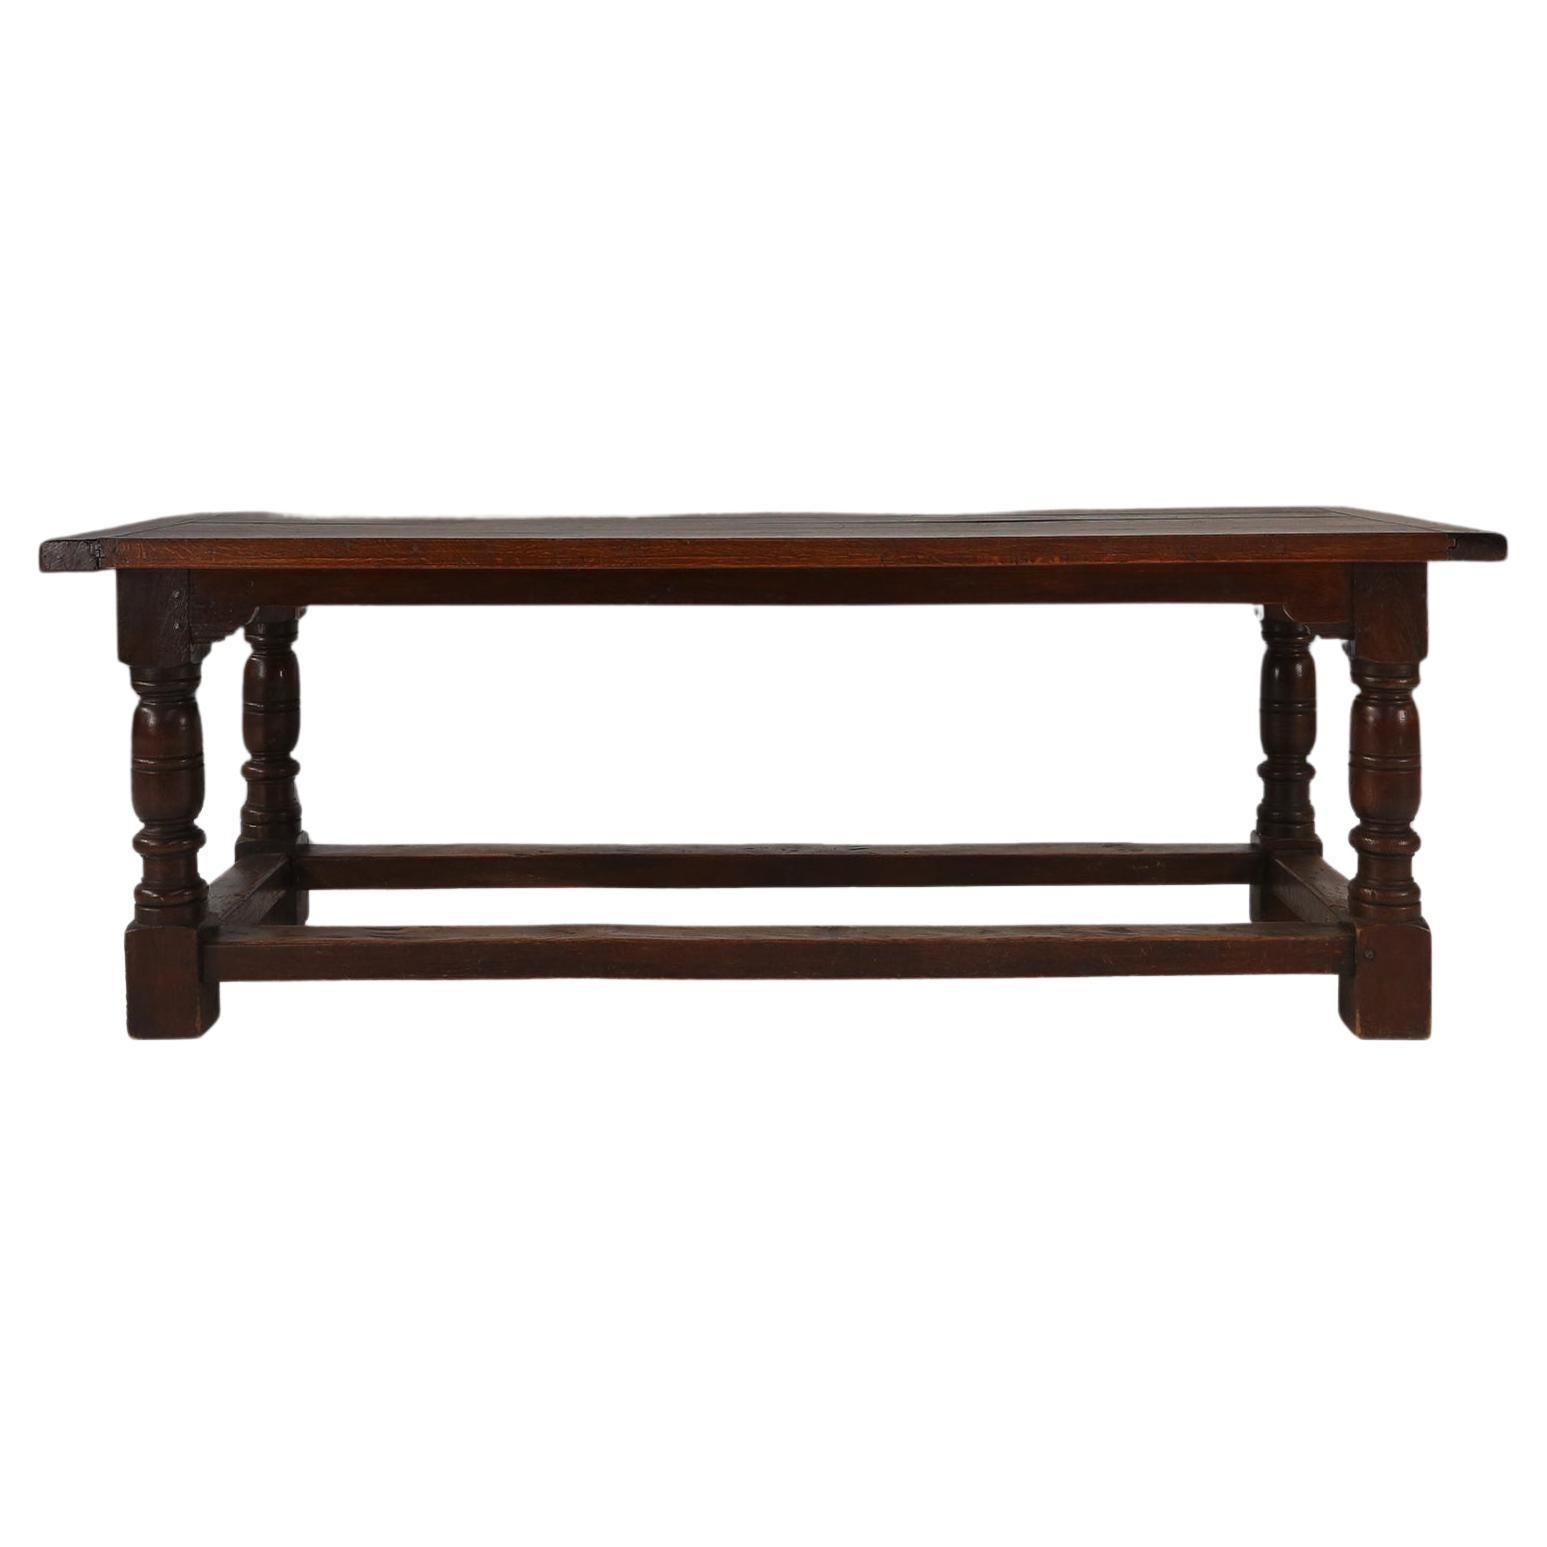 This French antique rustic dark oak table is the perfect addition to any modern living space or interior style. Crafted with precision and attention to detail, this table combines functionality with timeless beauty. Whether you're looking to create